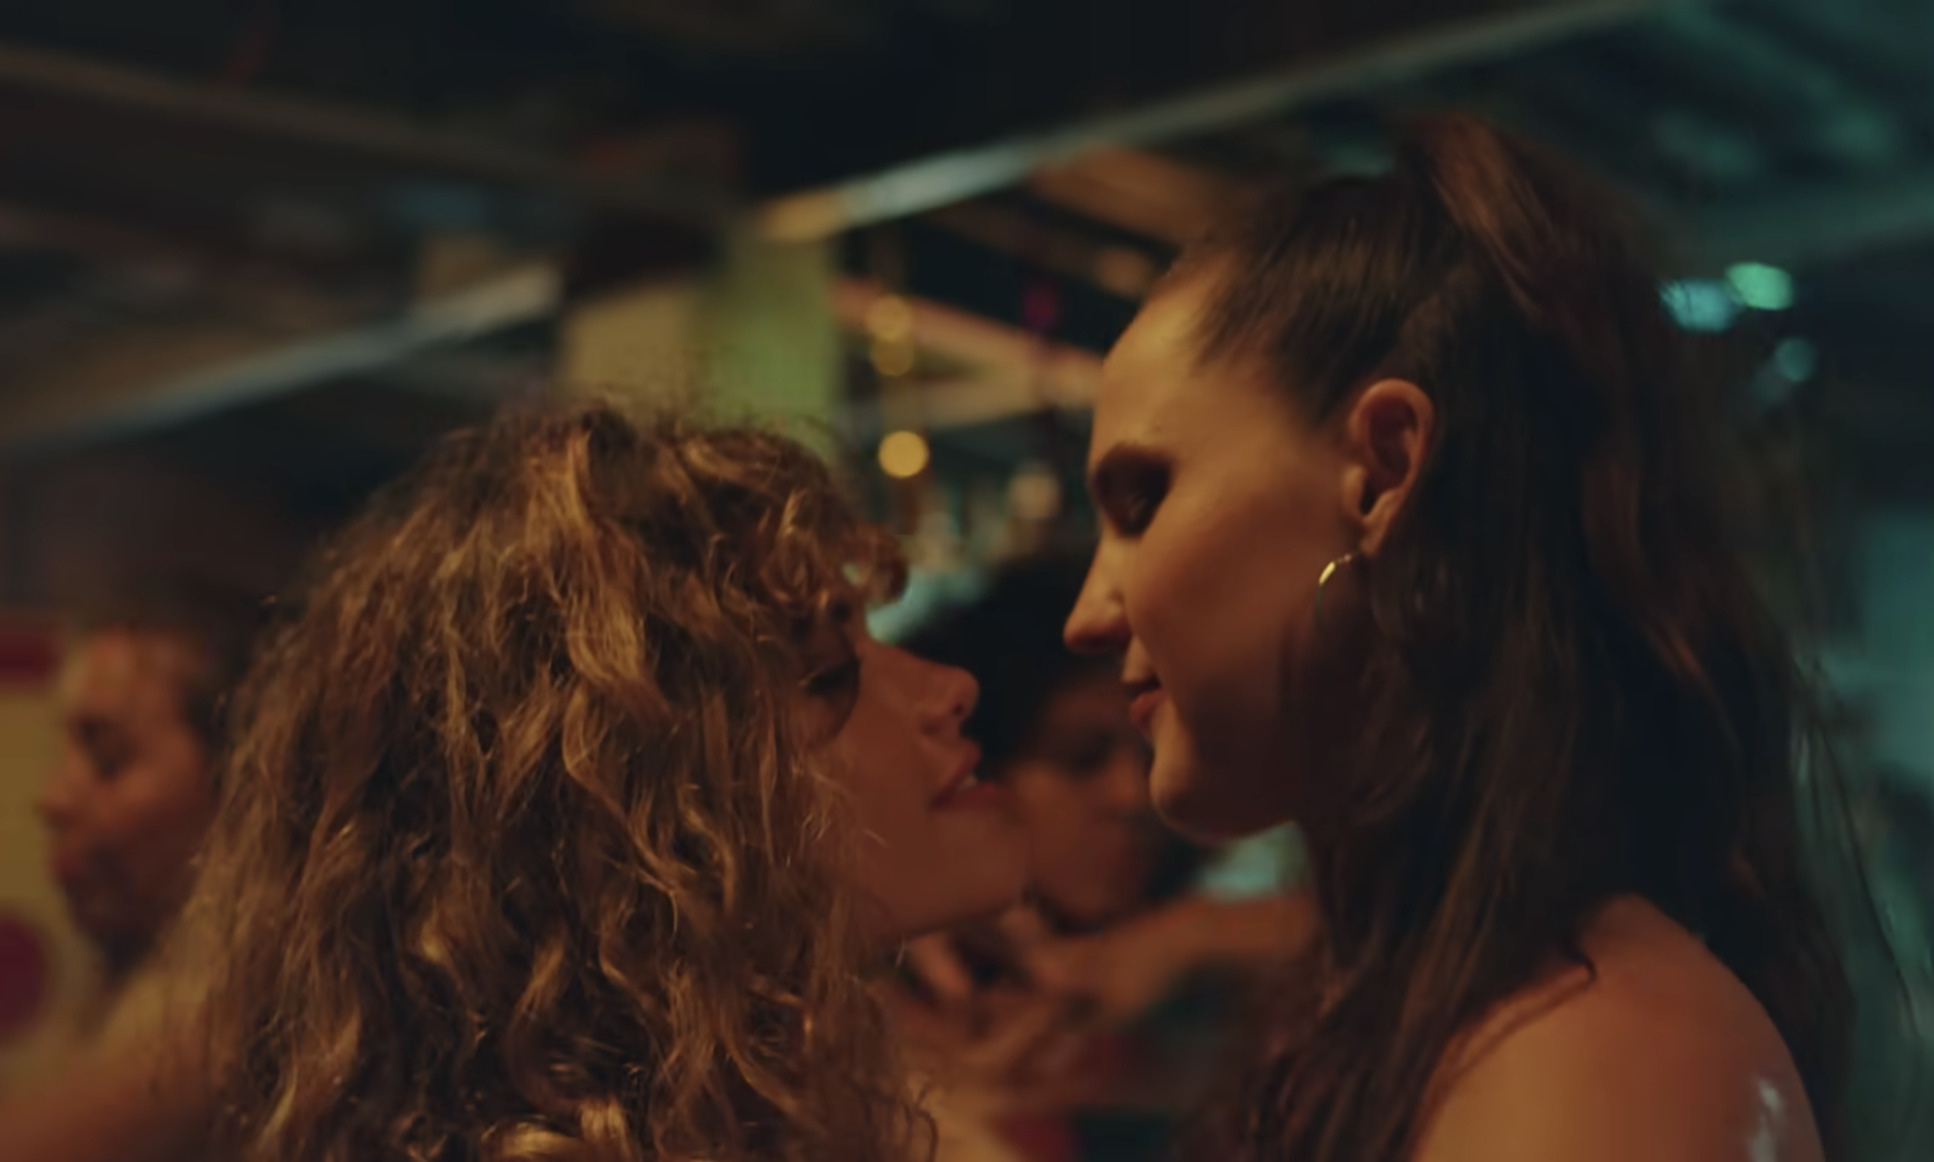 Sofi Tukker goes lesbian in Brazil with new music video - Queer Forty